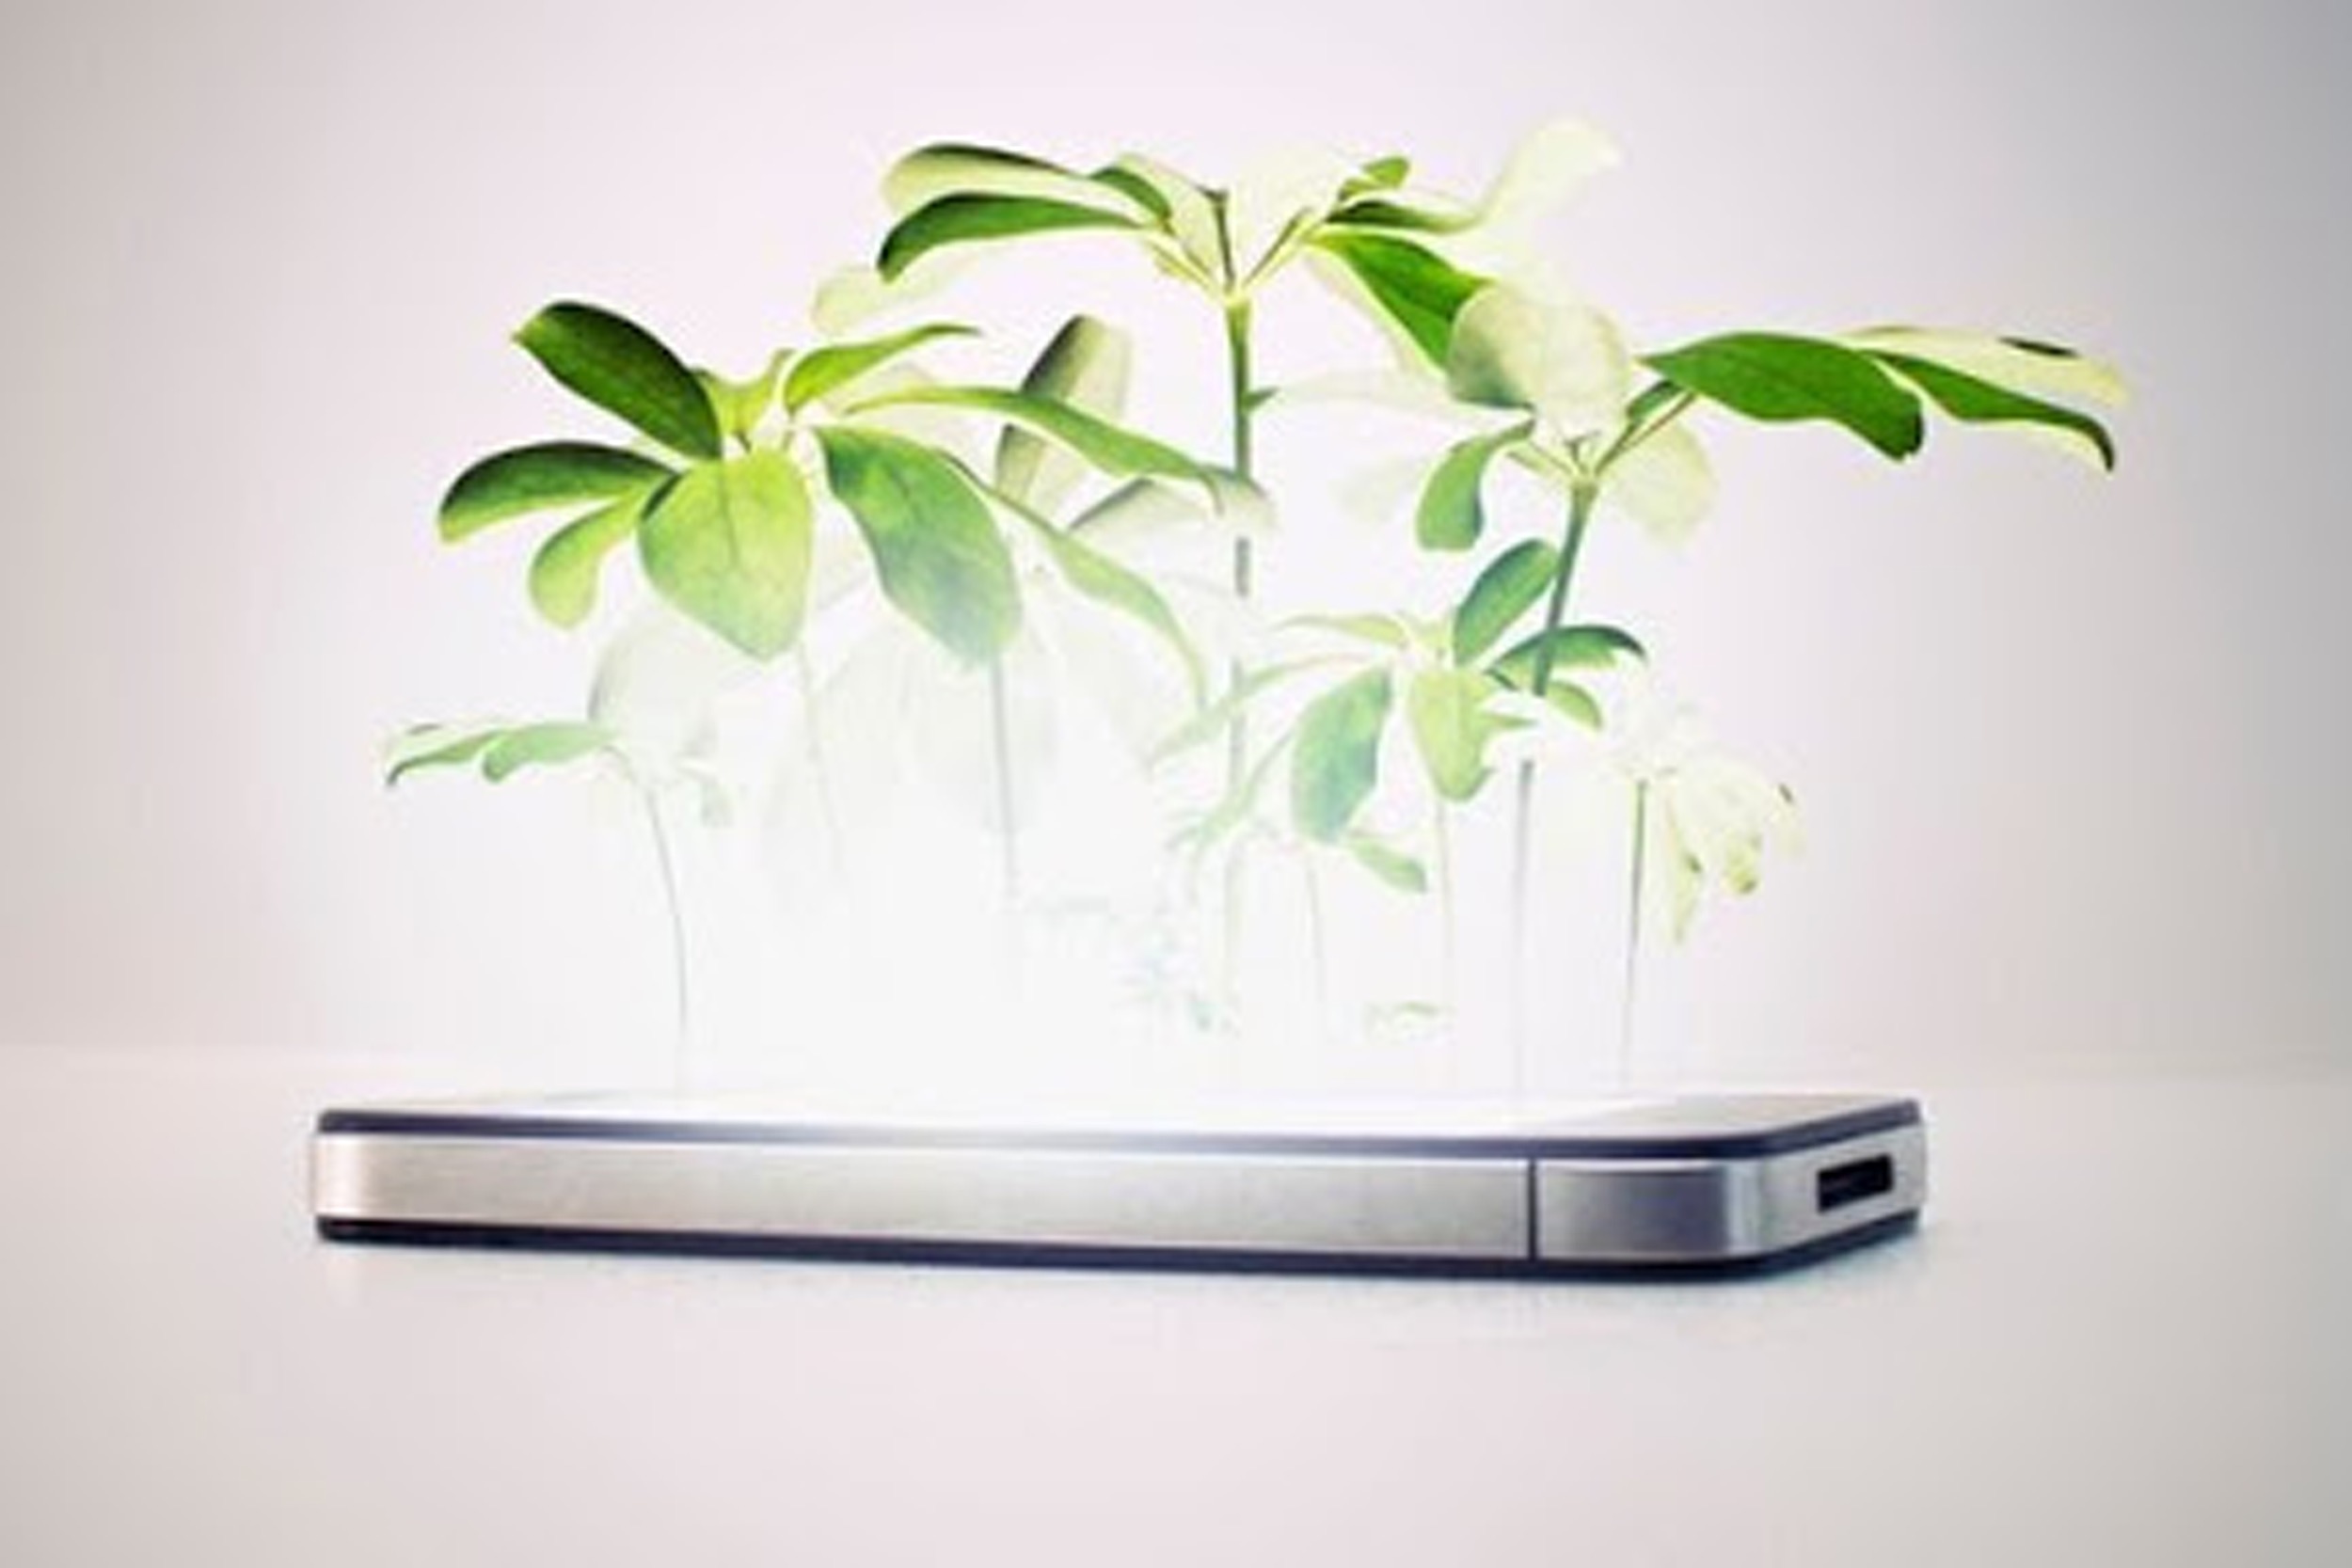 trees growing from hard disk